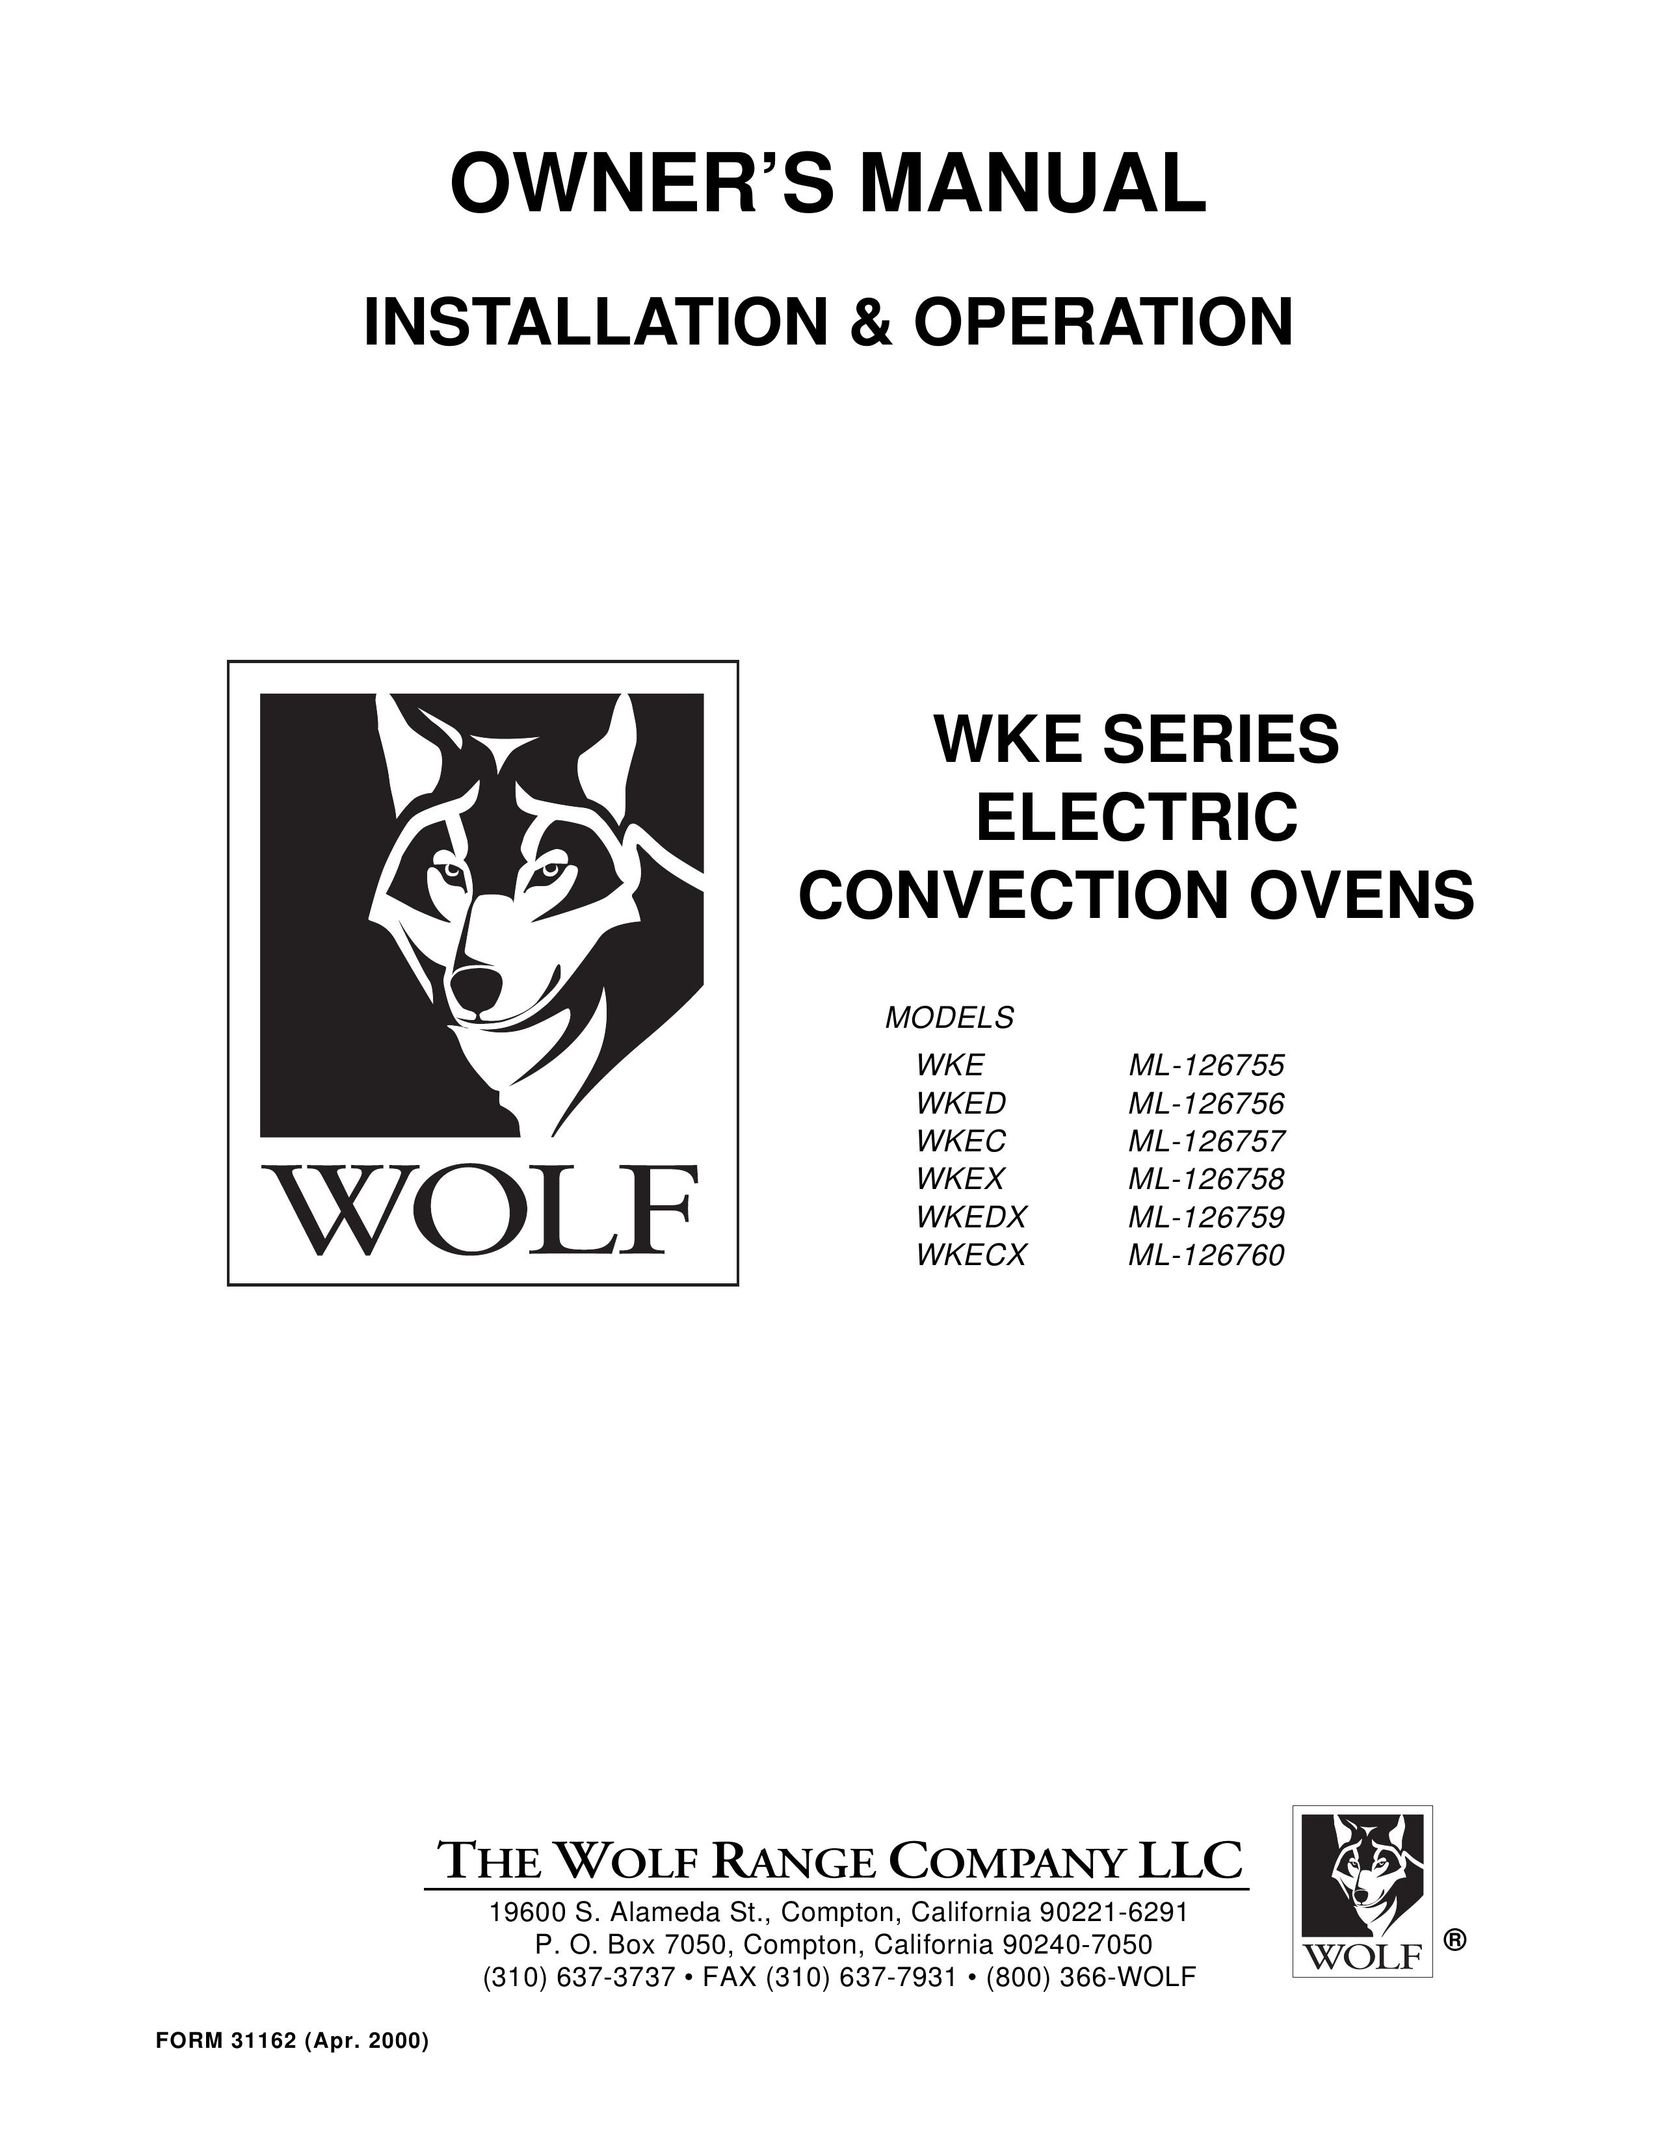 Wolf WKECX ML-126760 Convection Oven User Manual